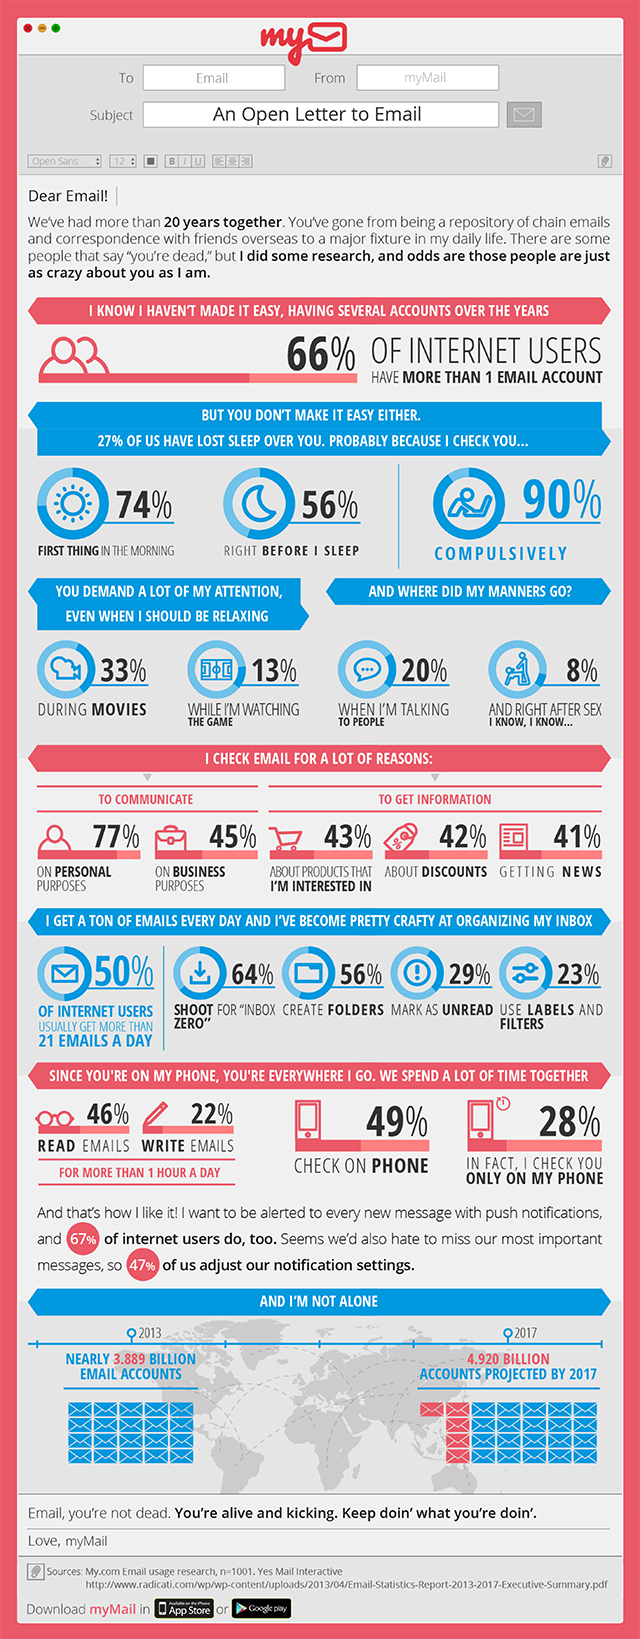 myMail_EmailSurvey_Infographic_Jul